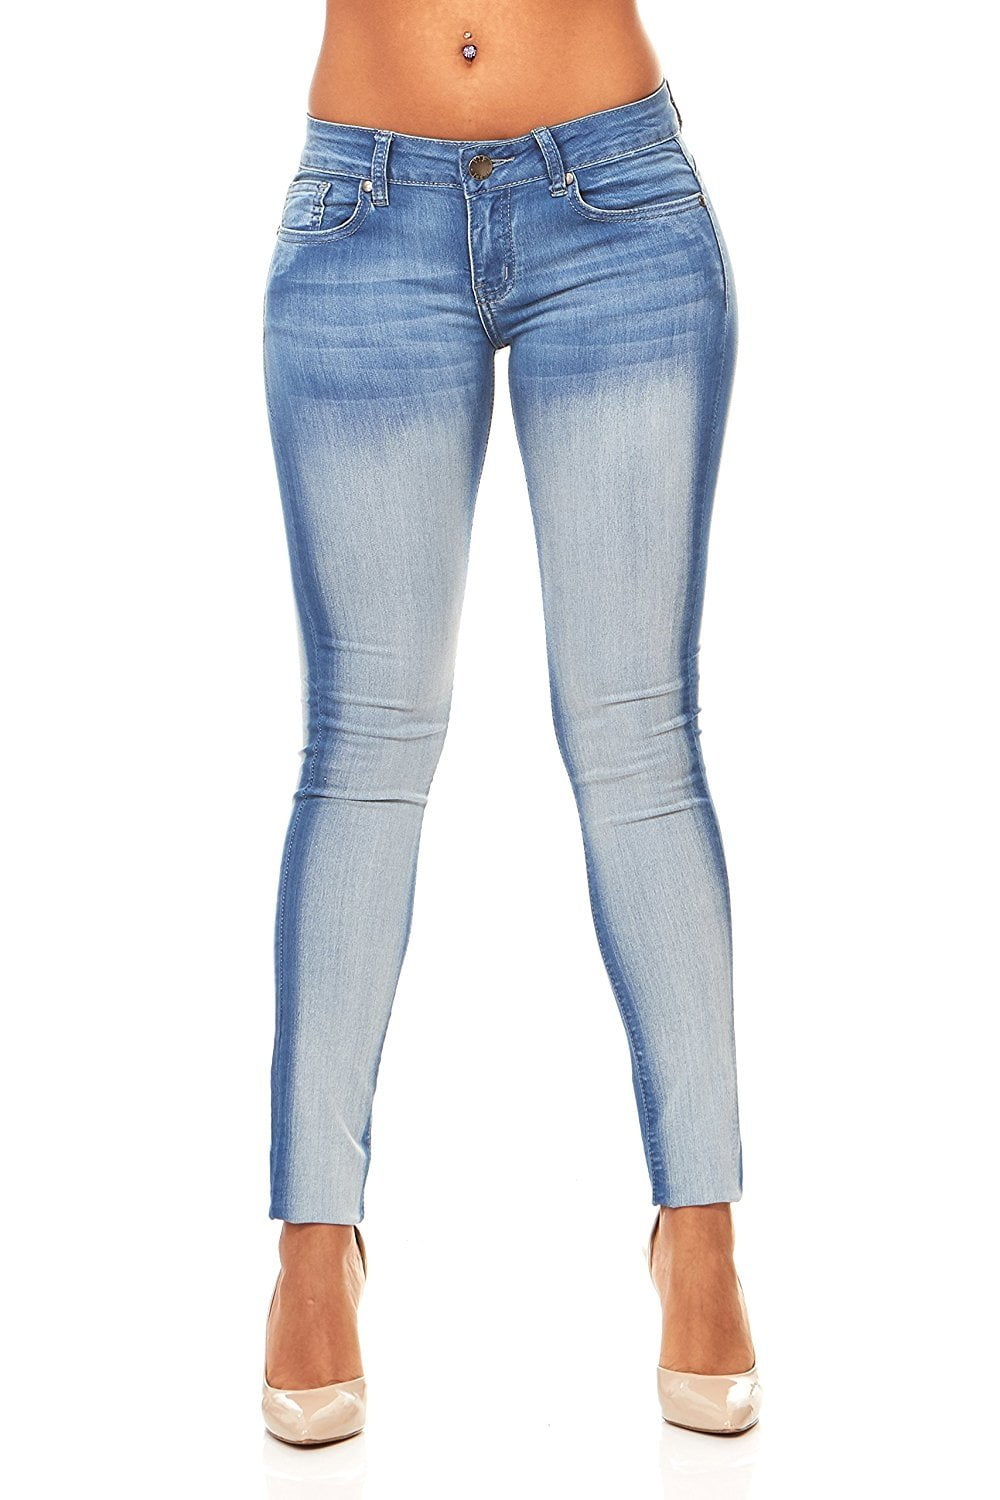 Ladies Skinny Fit Jeans – Rupees599.com | Online Clothing Shopping